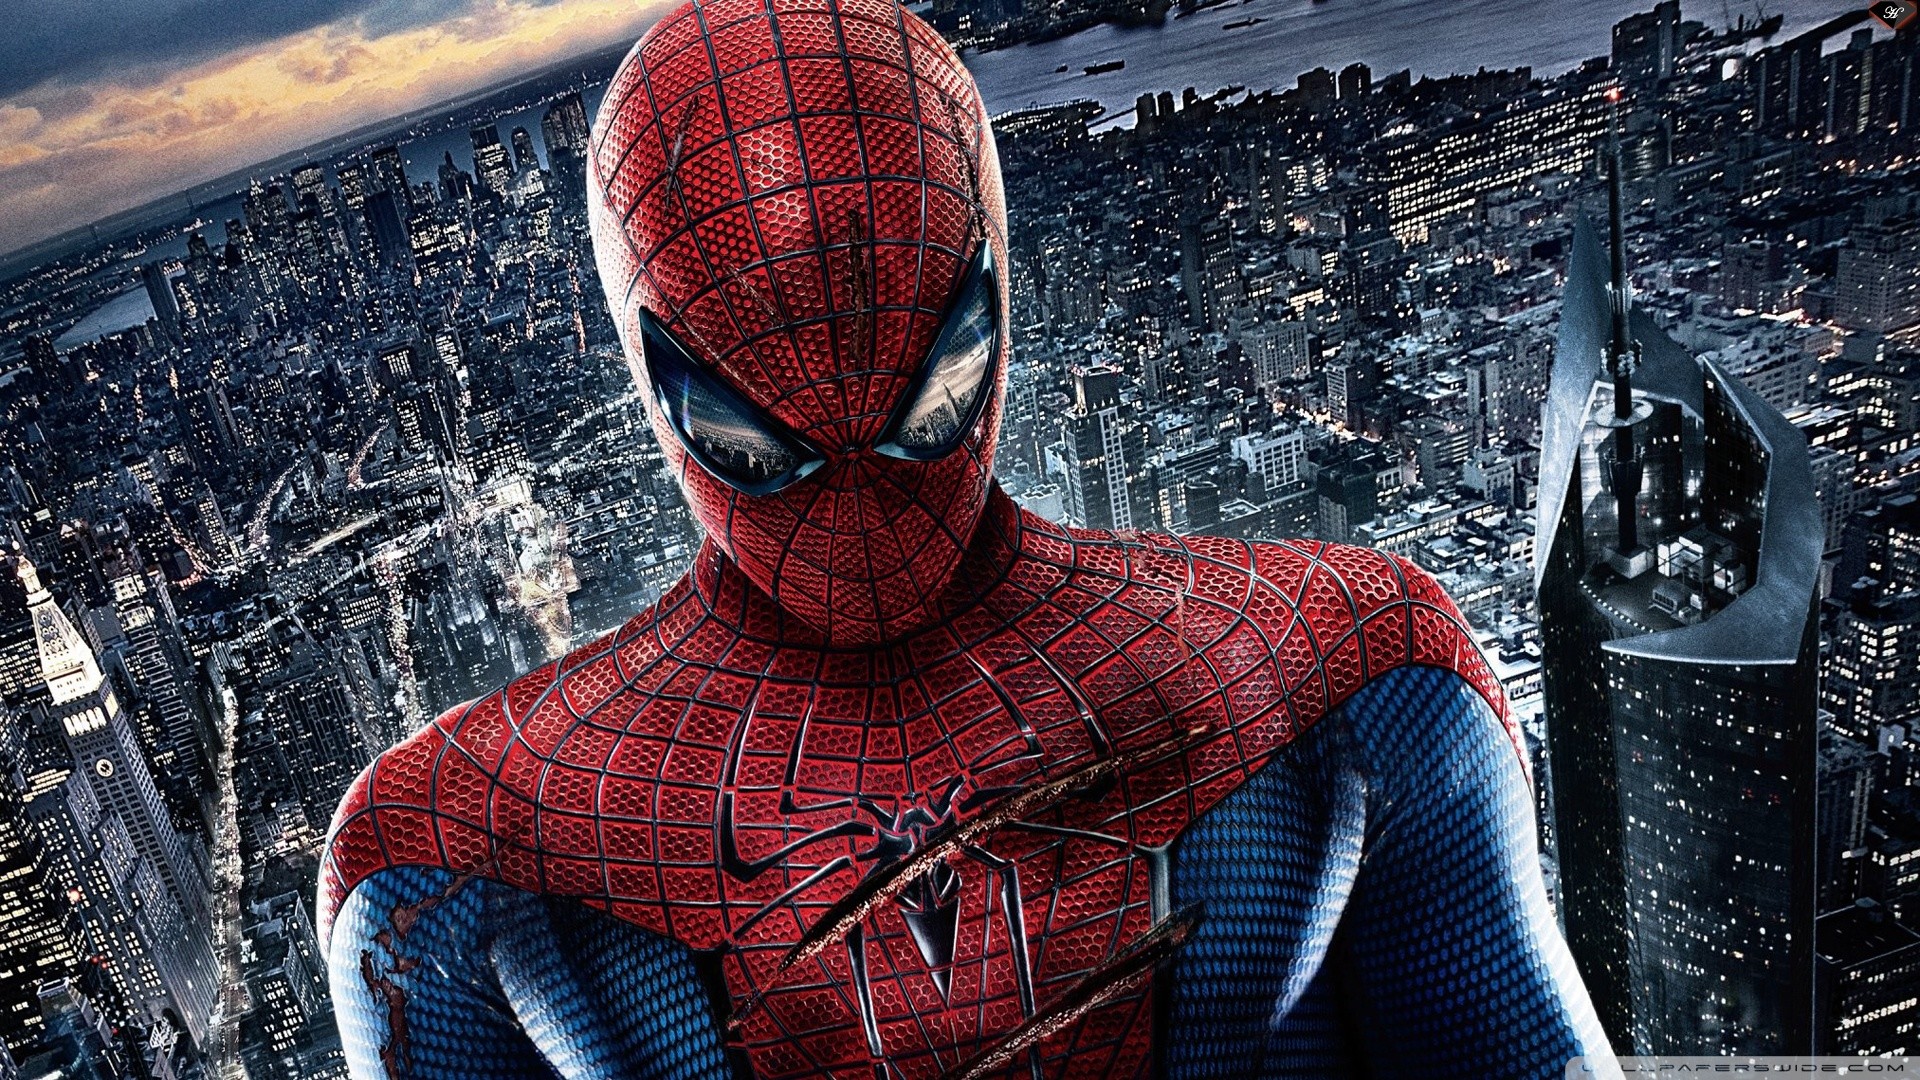 1920x1080 ... 77 The Amazing Spider-Man HD Wallpapers | Backgrounds - Wallpaper ...